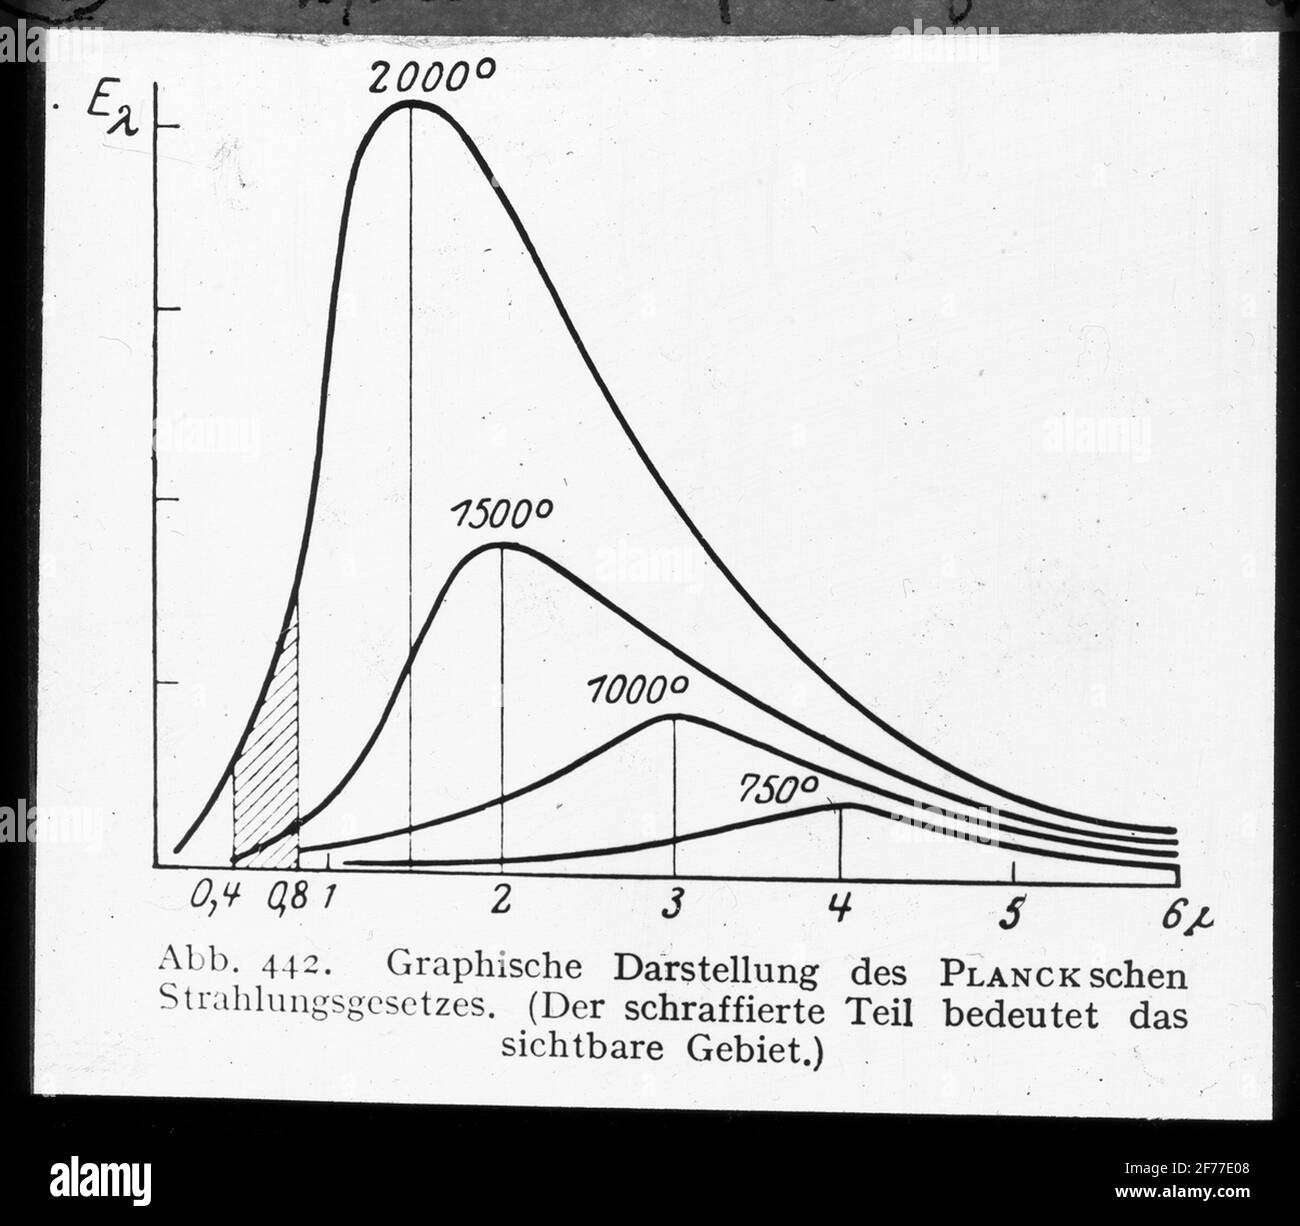 Skiopticon image from the Department of Photography at the Royal Institute of Technology. Use by Professor Helmer Bäckström as lecture material. Bäckström was Sweden's first professor in photography at the Royal Institute of Technology in Stockholm 1948-1958. Energy Distribution in the spectrum for black body. The visible area is shaded. Stock Photo